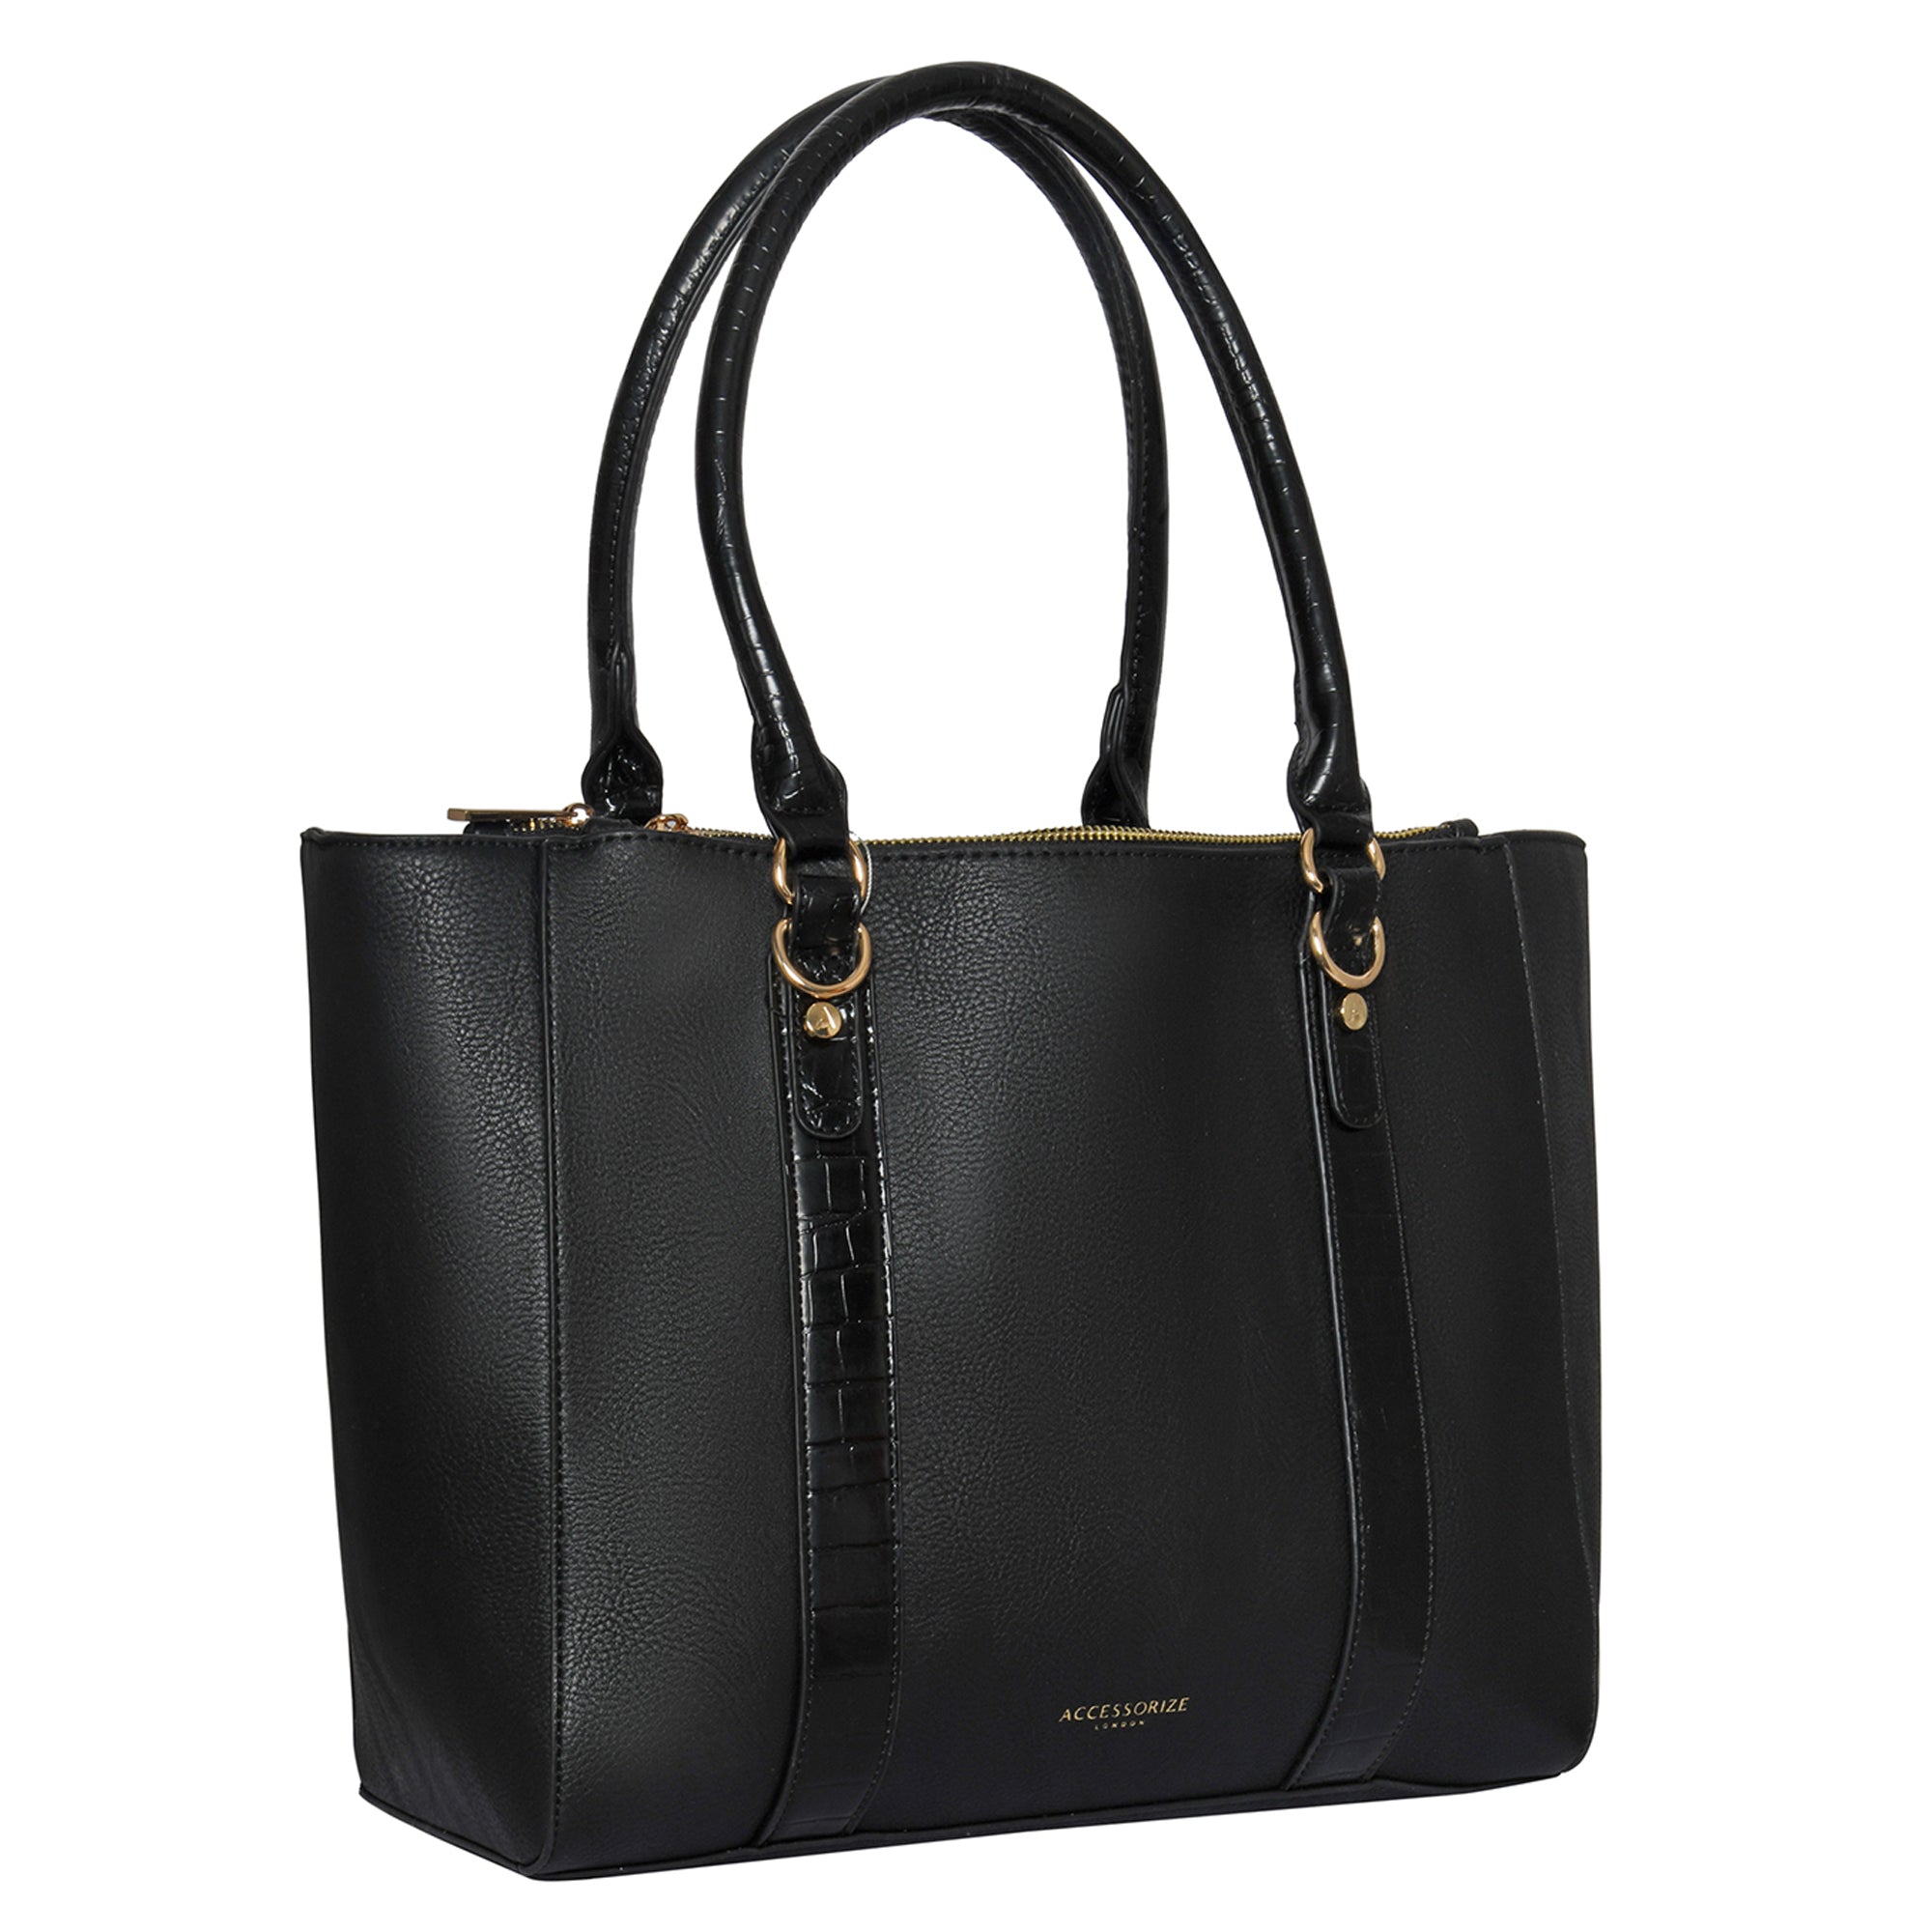 Accessorize London Women's Faux Leather Black Multi Function Handbag At Nykaa Fashion - Your Online Shopping Store